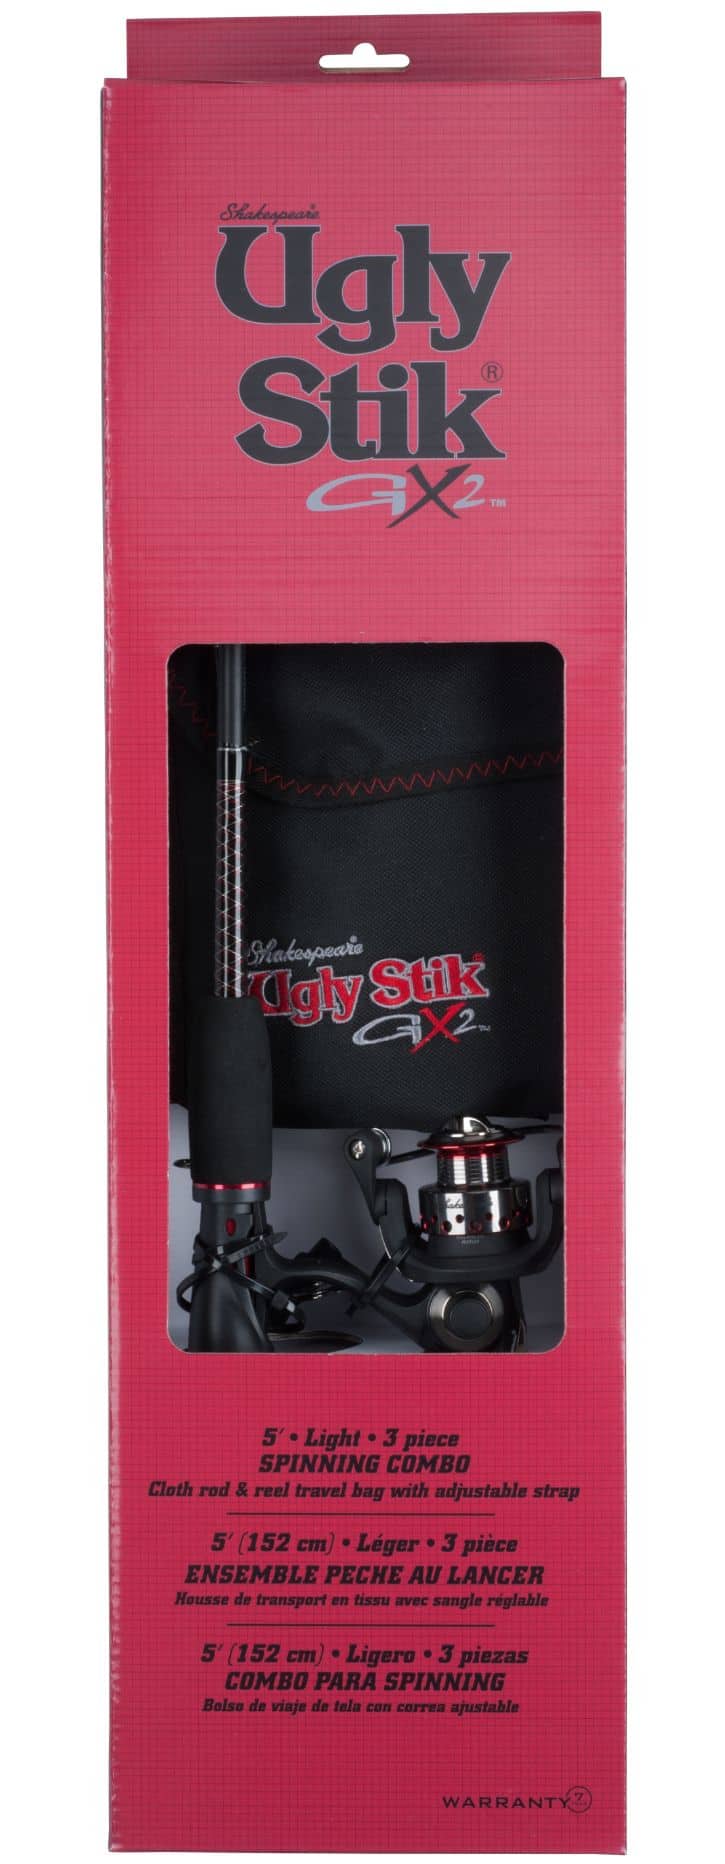 https://media-www.canadiantire.ca/product/playing/fishing/fishing-equipment/1782410/shakespeare-ugly-stik-gx2-travel-spinning-combo-5-light-7eee72cd-32b3-4944-a907-4eff661d1577-jpgrendition.jpg